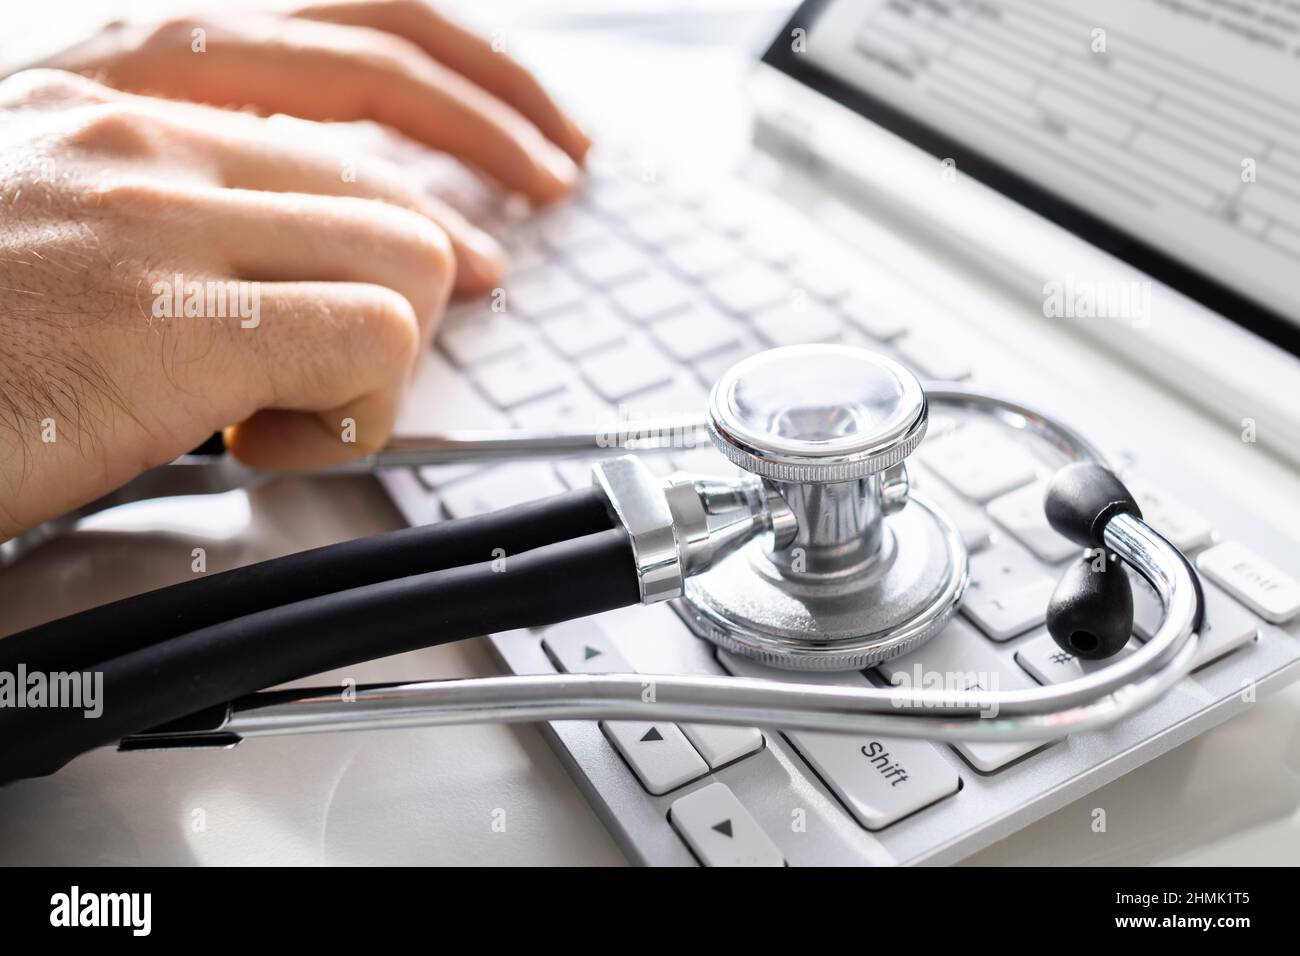 Medical Health Diagnose Software And Support Programs Stock Photo